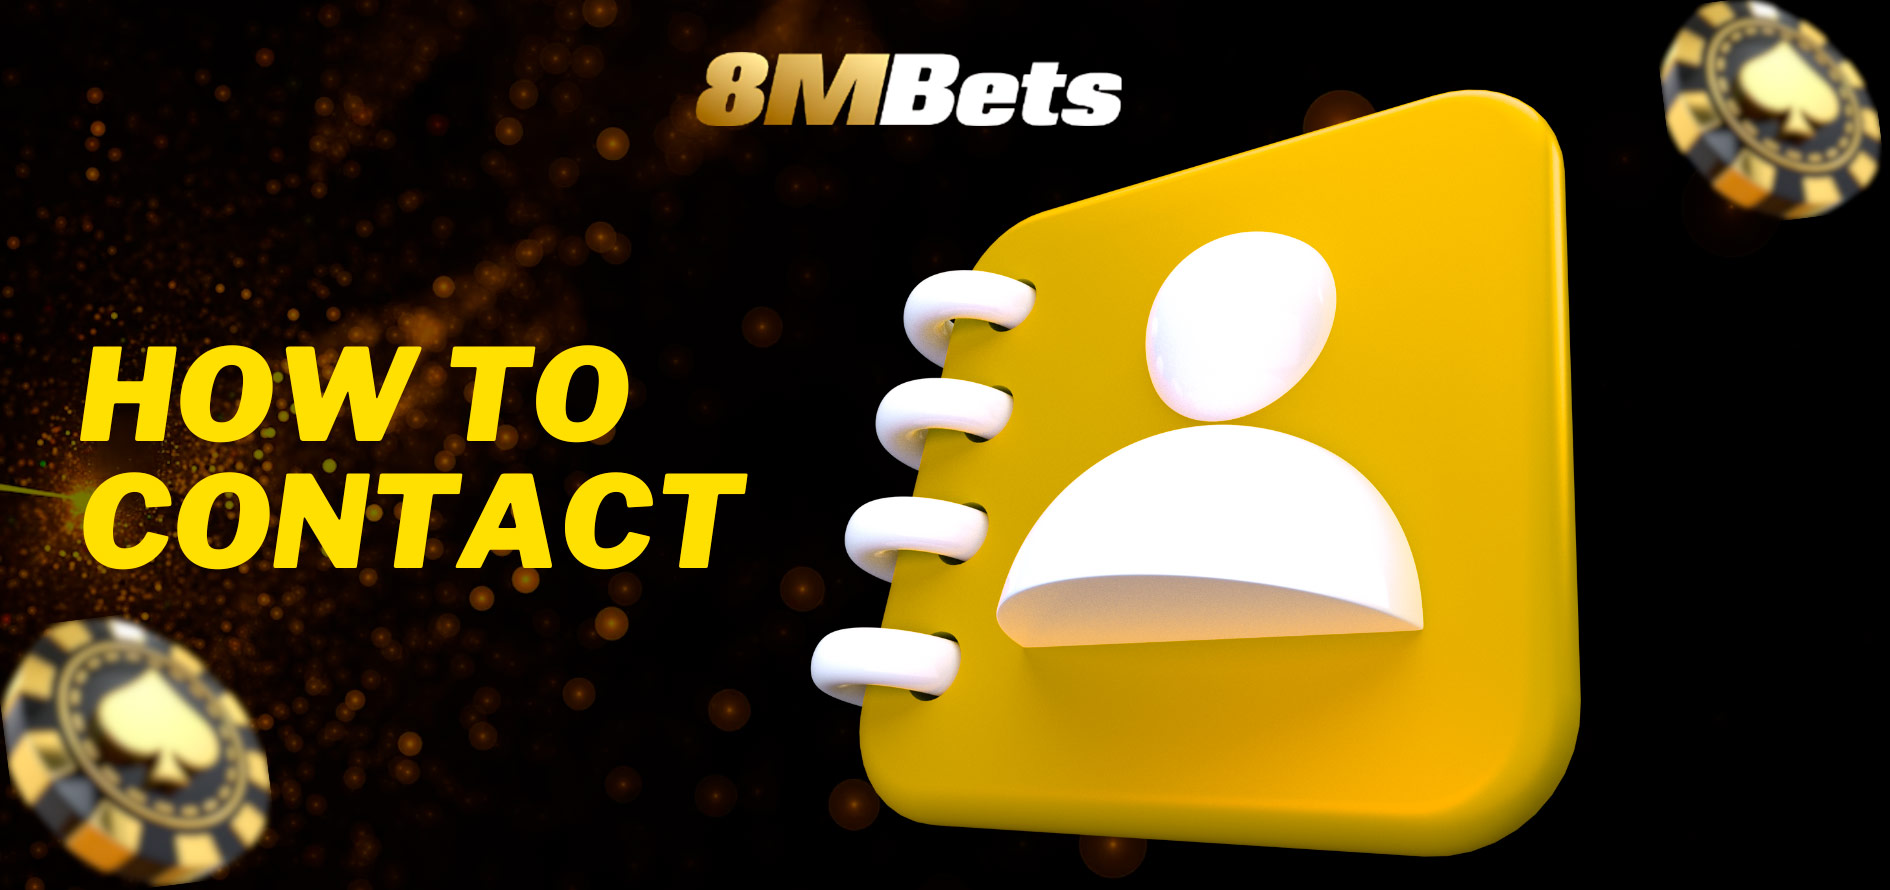 How to Easily Contact 8MBets Support: A Step-by-Step Guide